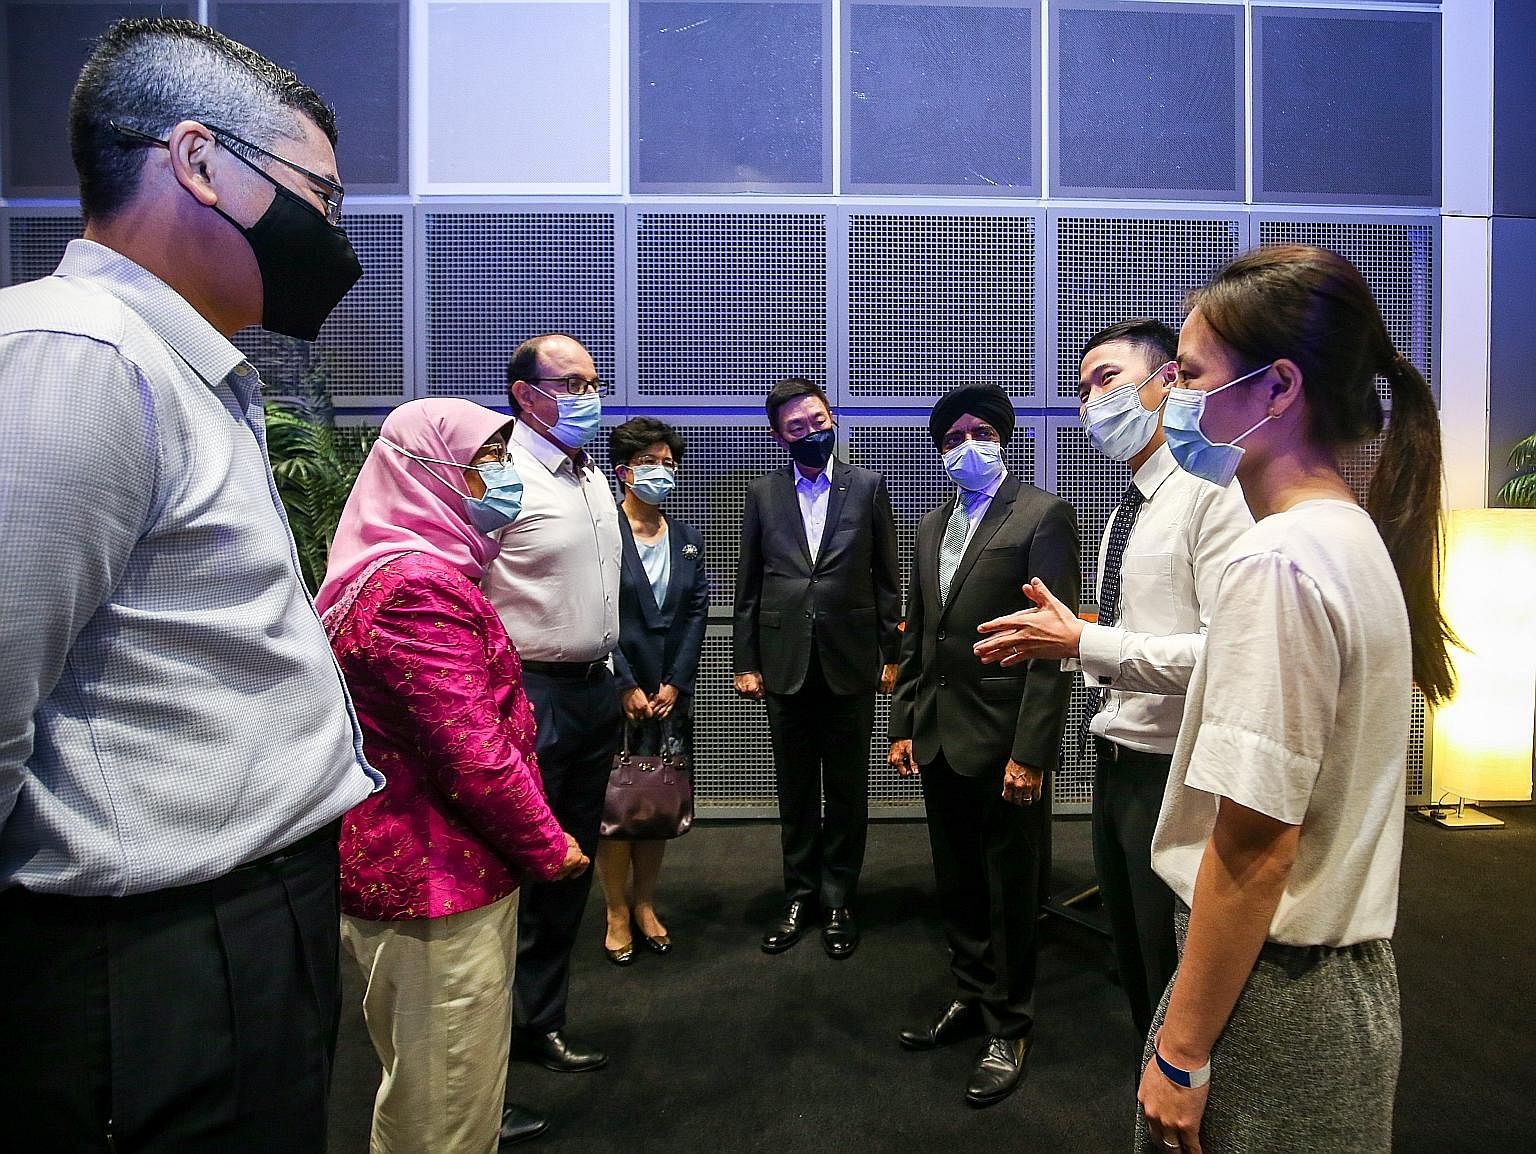 President Halimah Yacob and Minister for Communications and Information S. Iswaran yesterday at the Infocomm Media Development Authority's Partners' Appreciation event to recognise those who contributed to digital inclusion and readiness efforts here